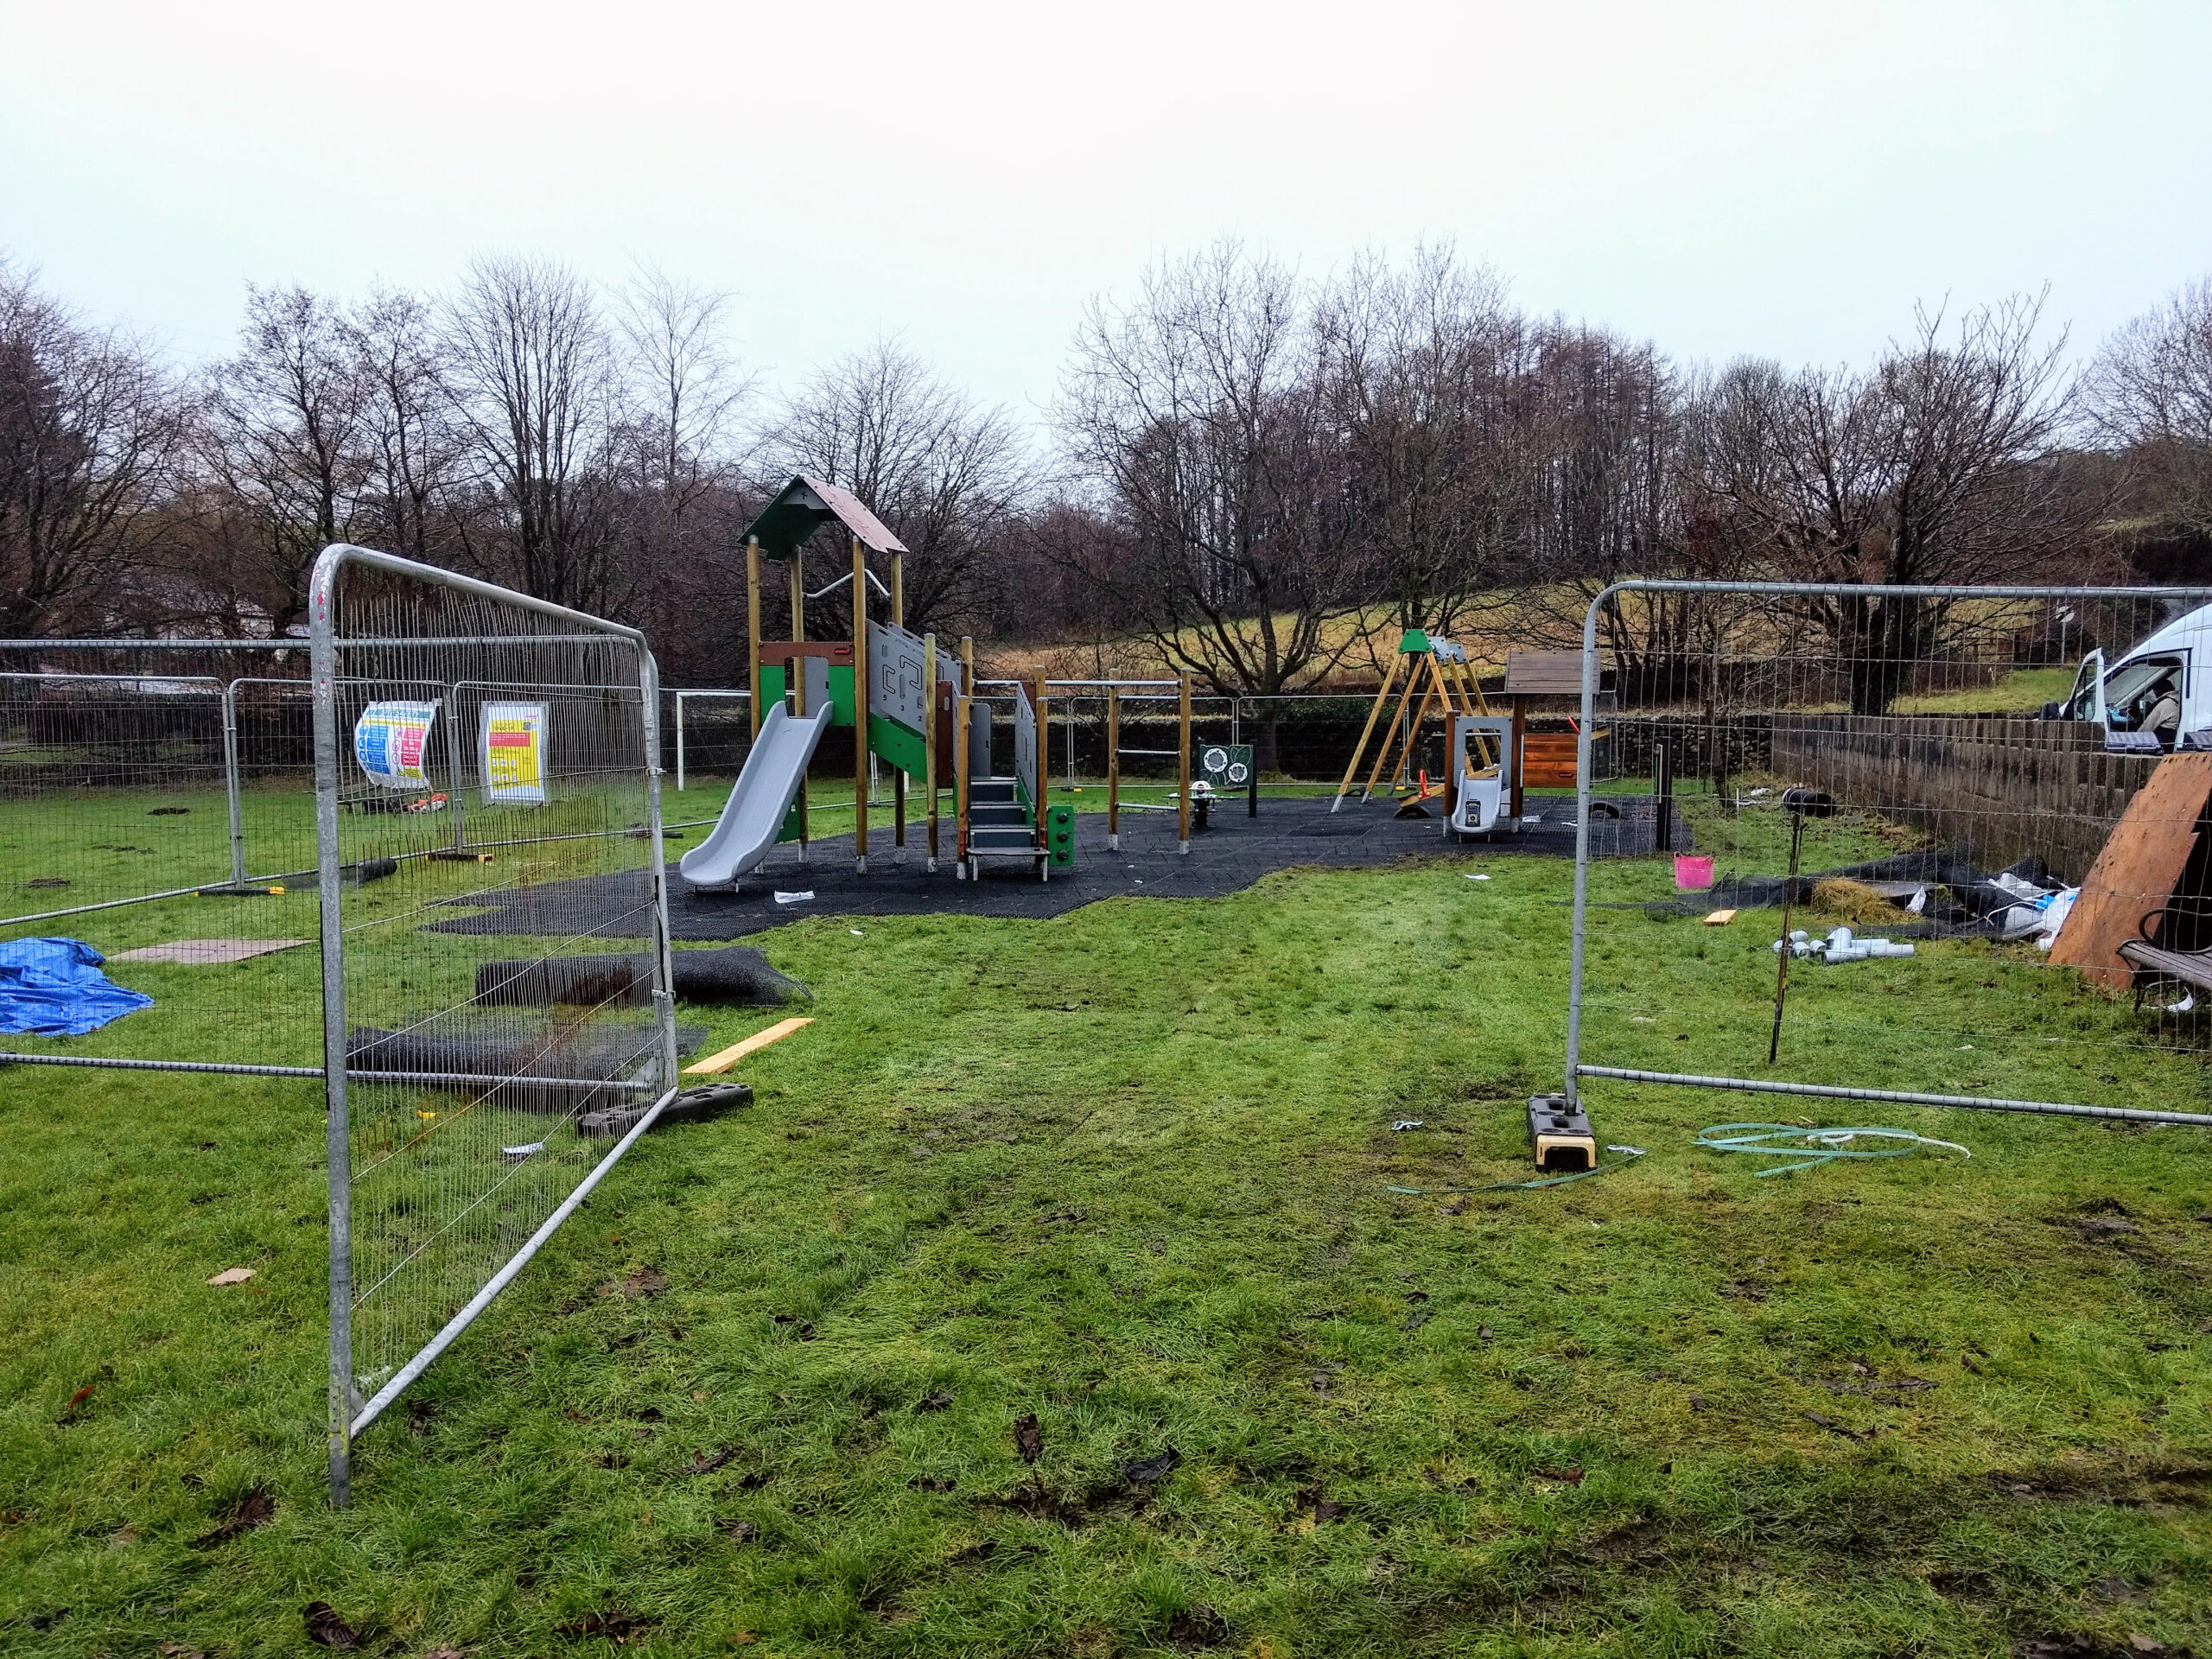 Construction underway at the Play Area with some equipment in-situ